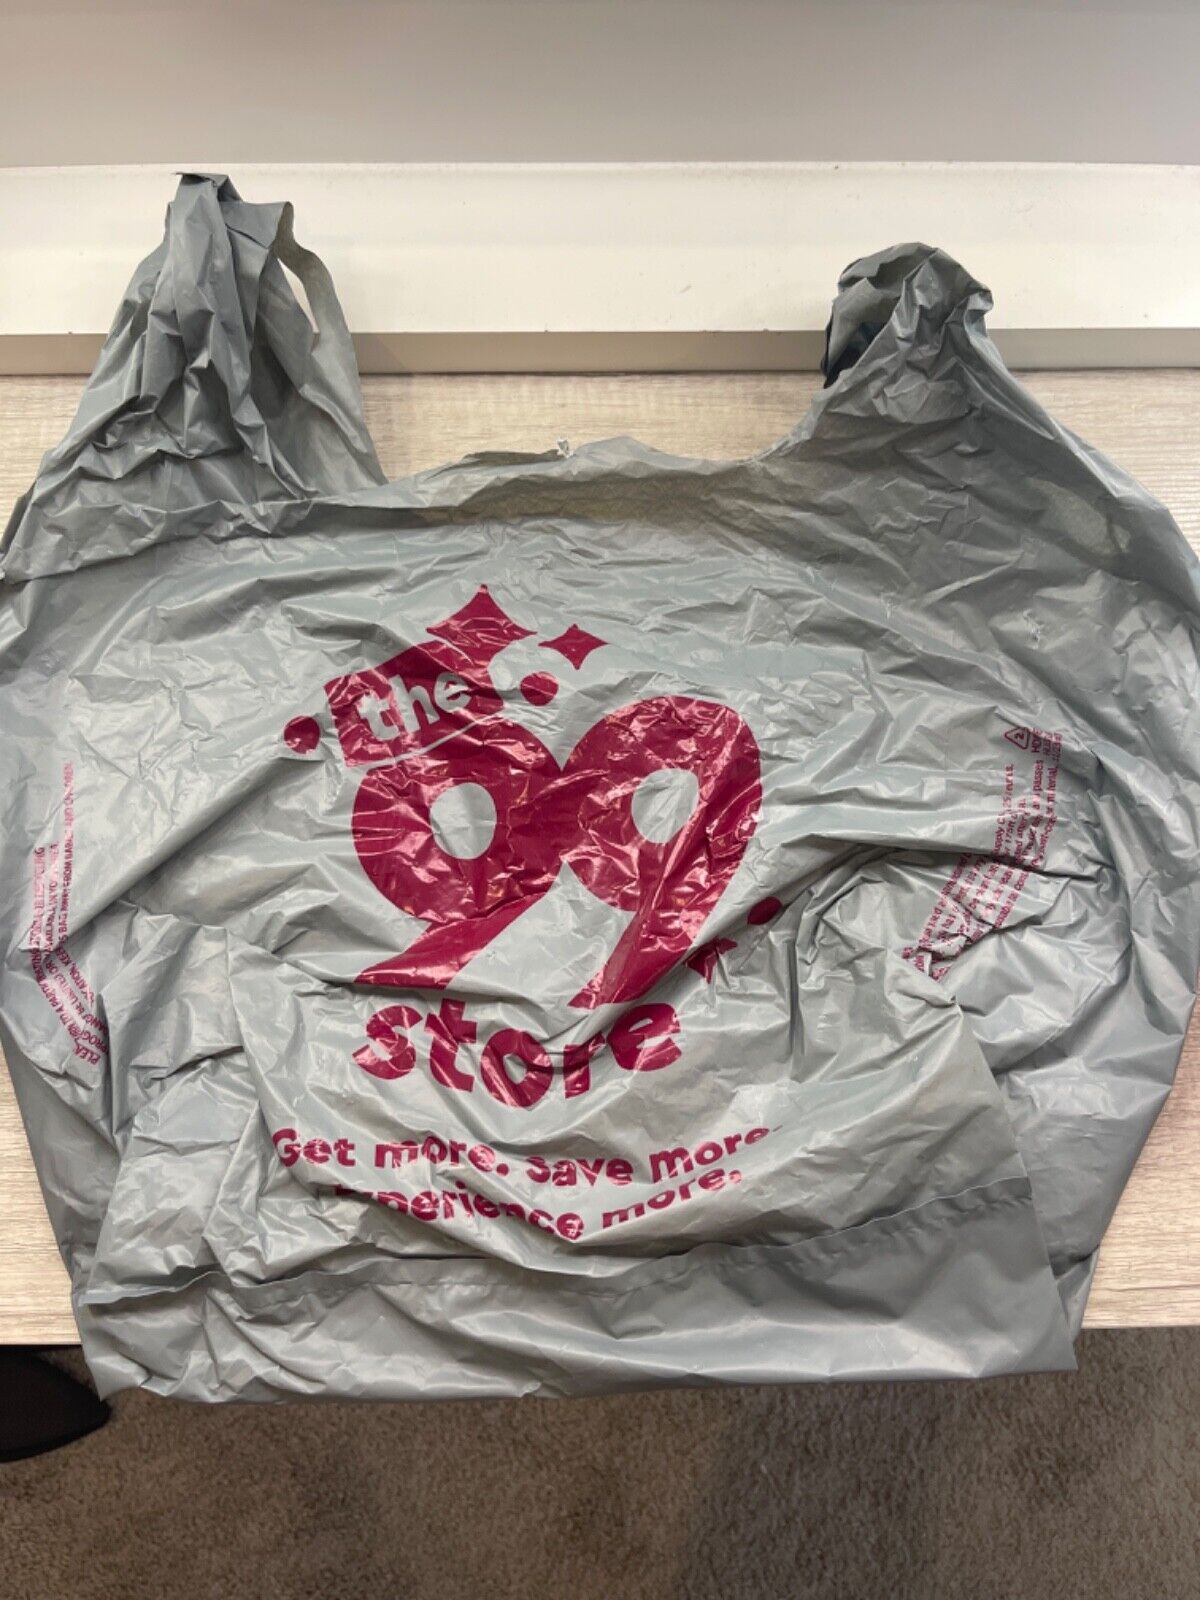 99 cent store bag \\ store closed: grey plastic bag. only used once